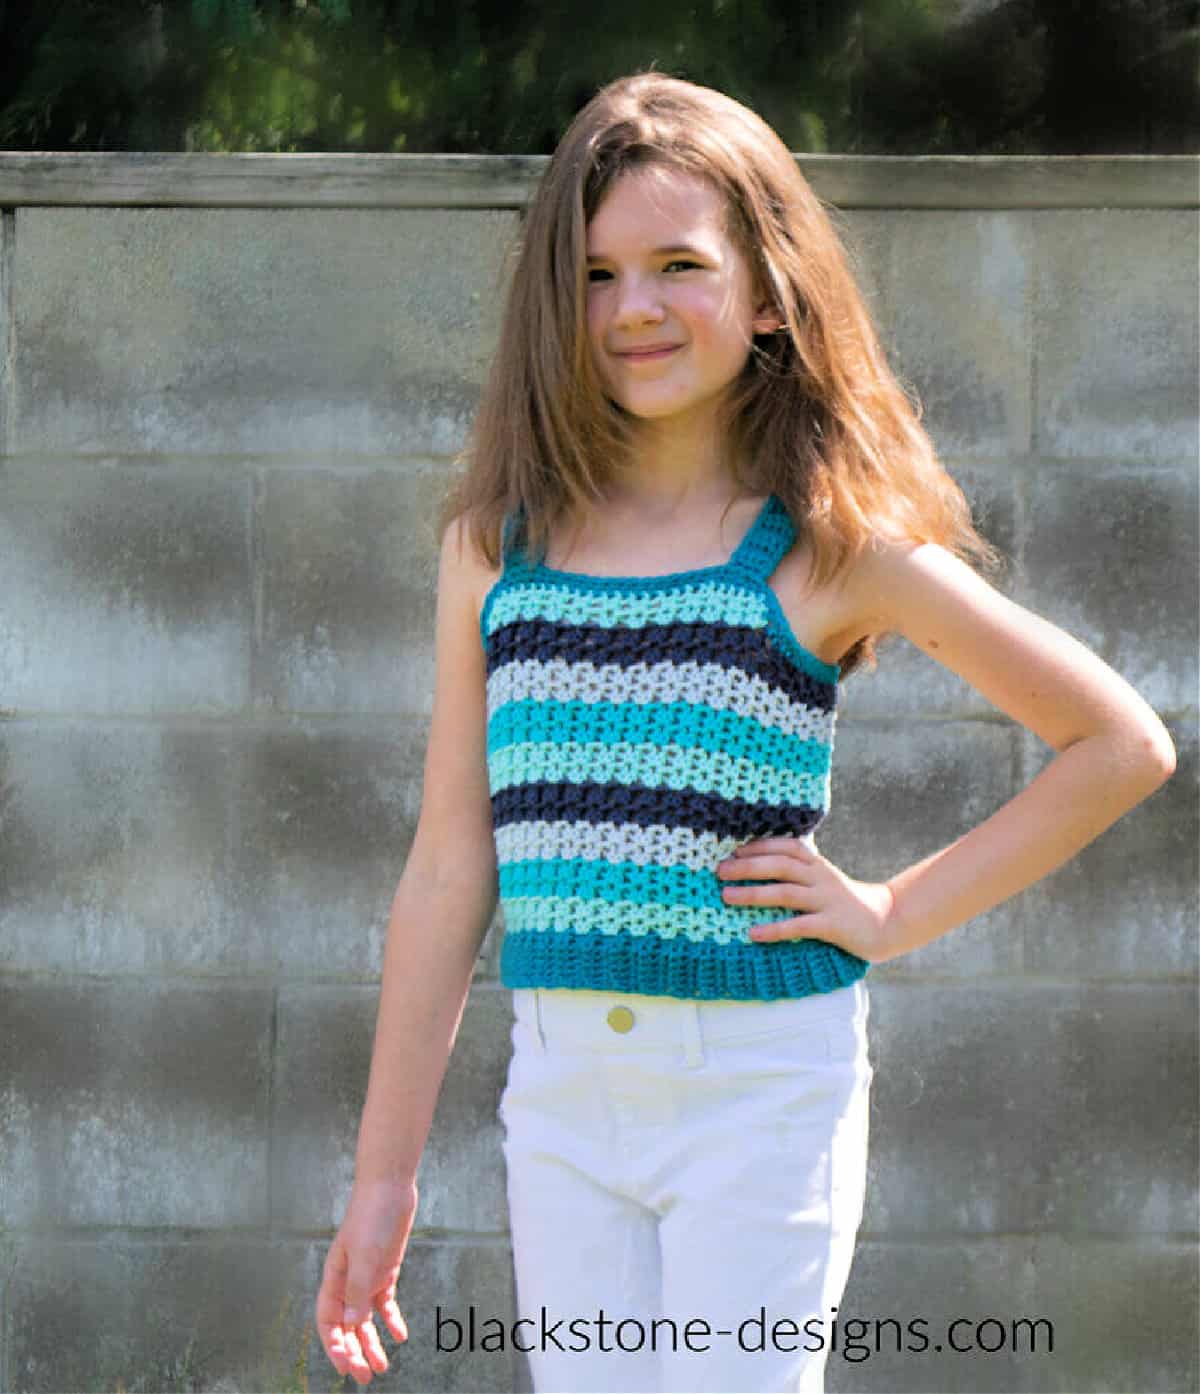 Young girl modeling a crochet tank top